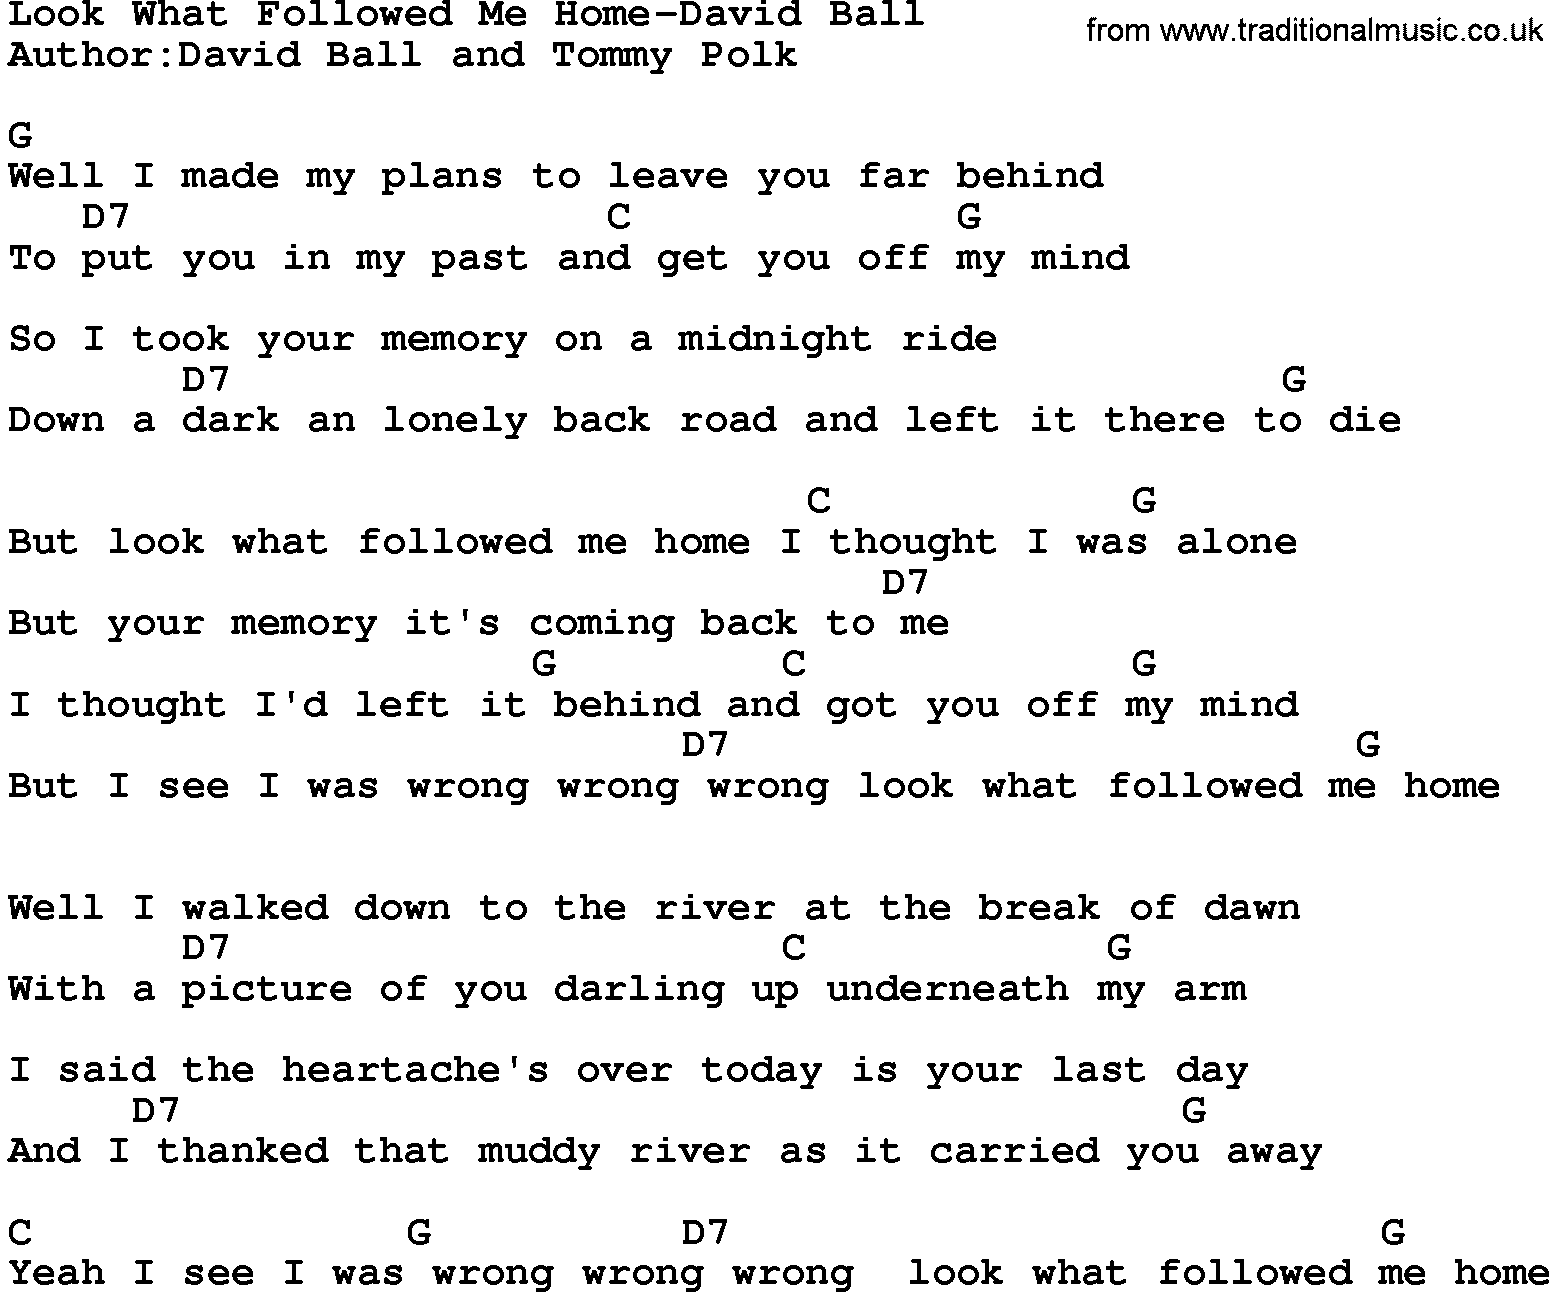 Country music song: Look What Followed Me Home-David Ball lyrics and chords